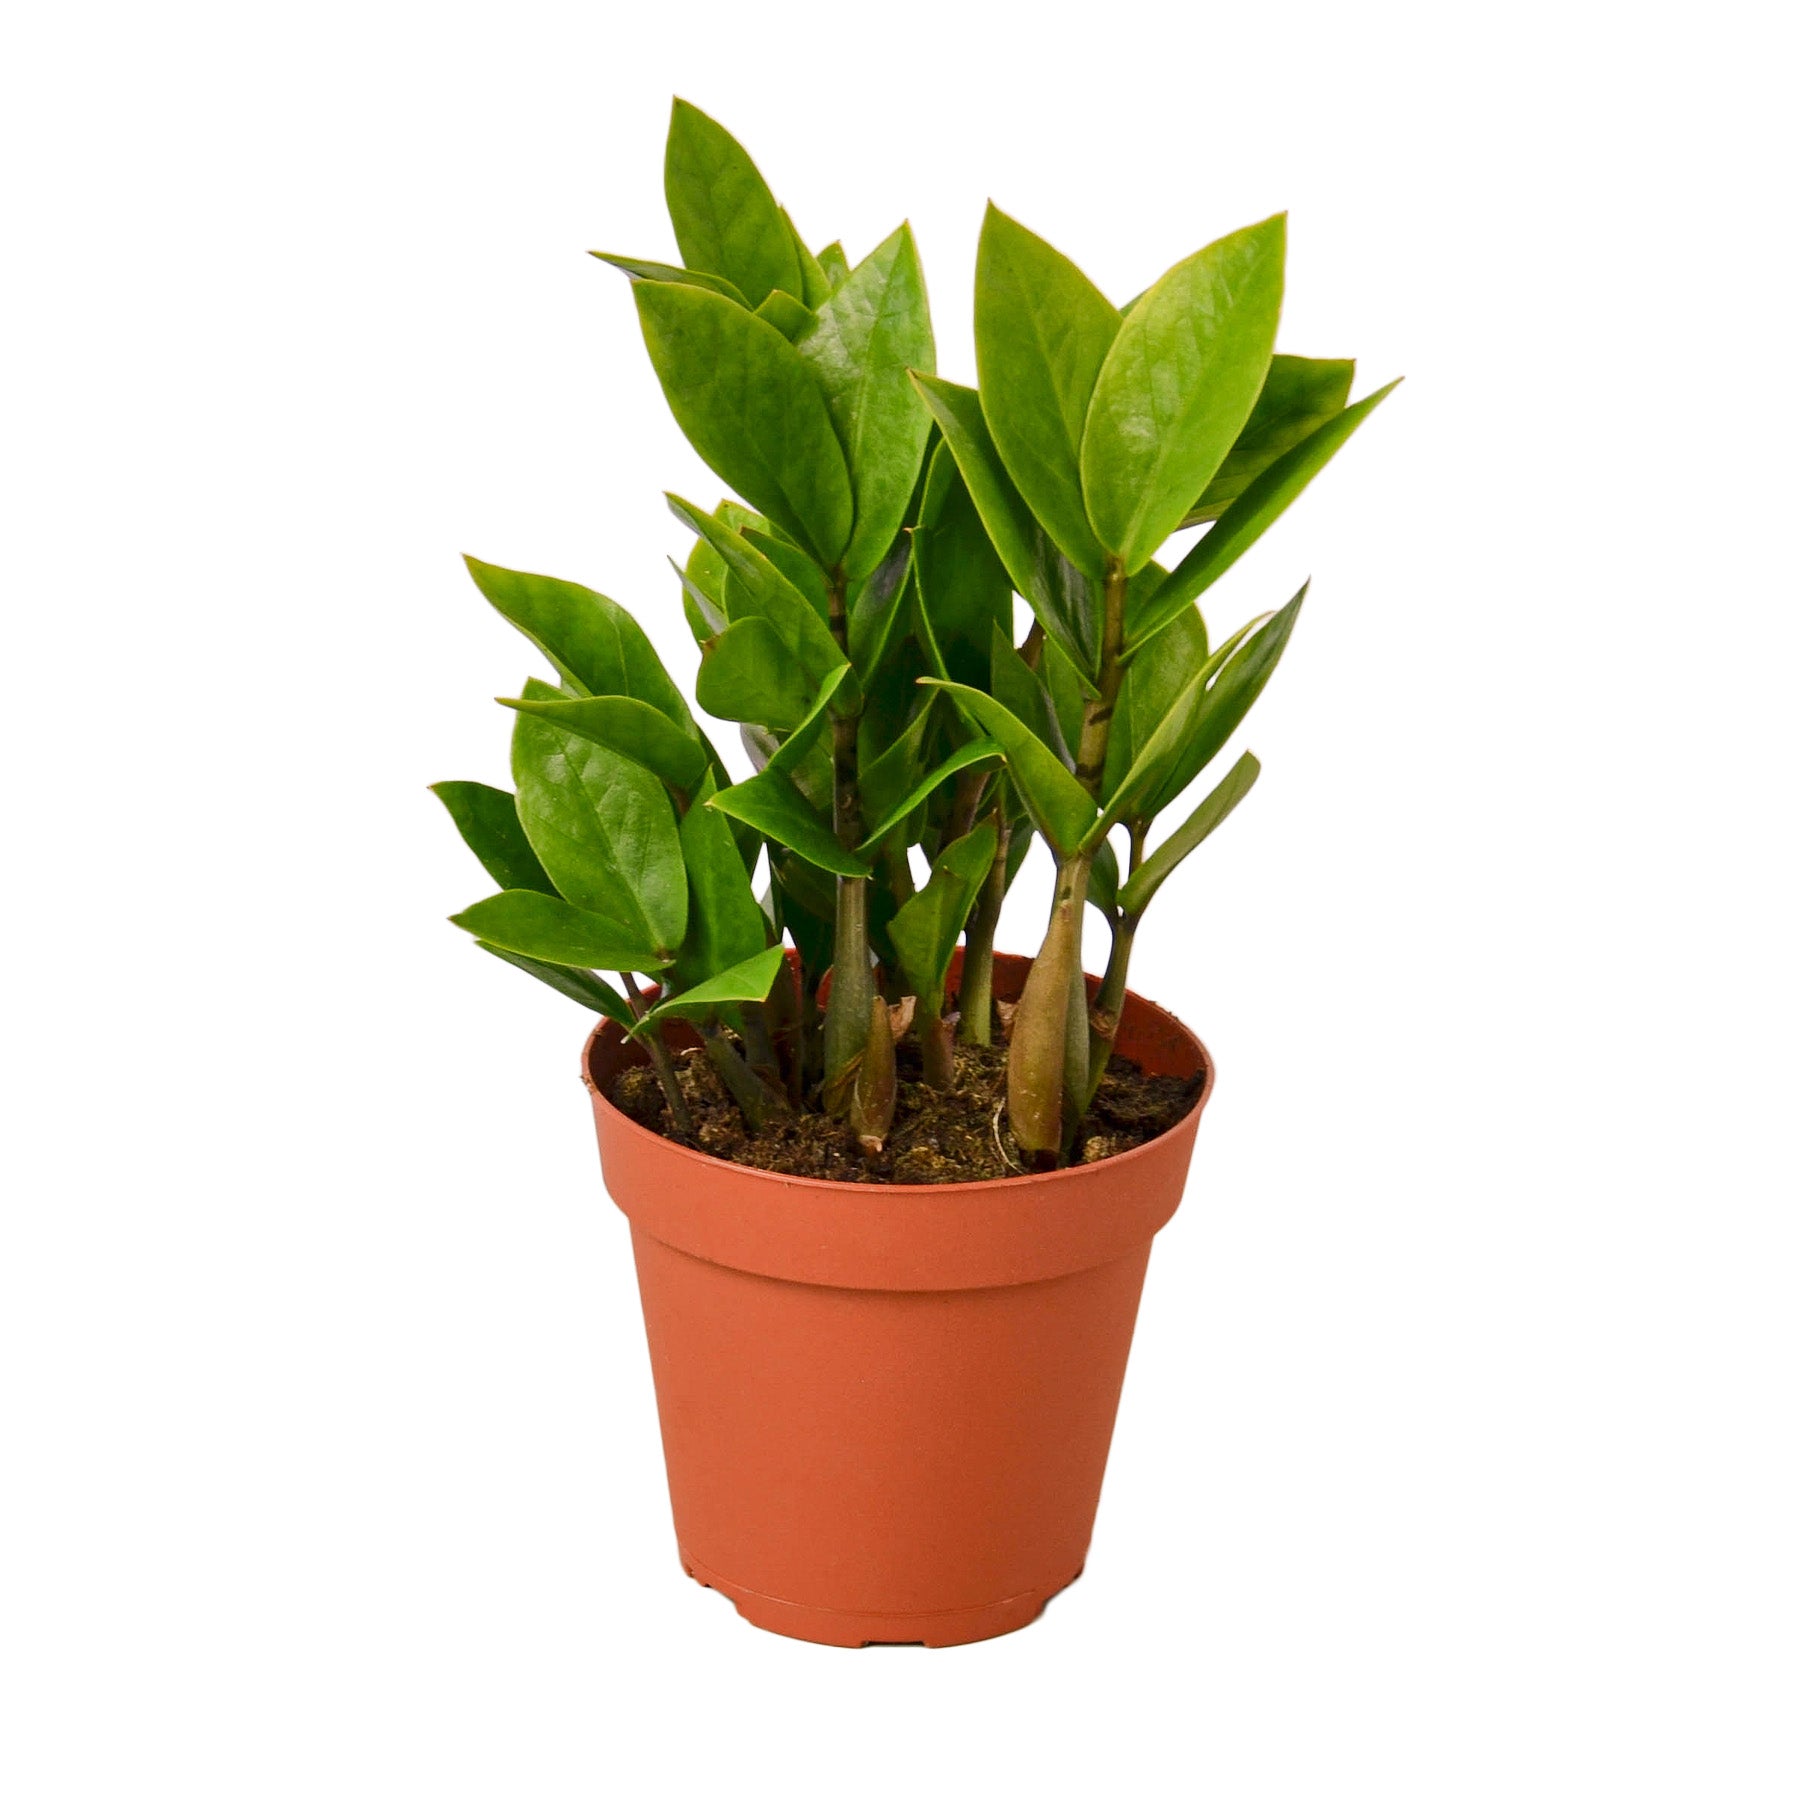 A small plant in a pot, ideal for your nearby nursery.